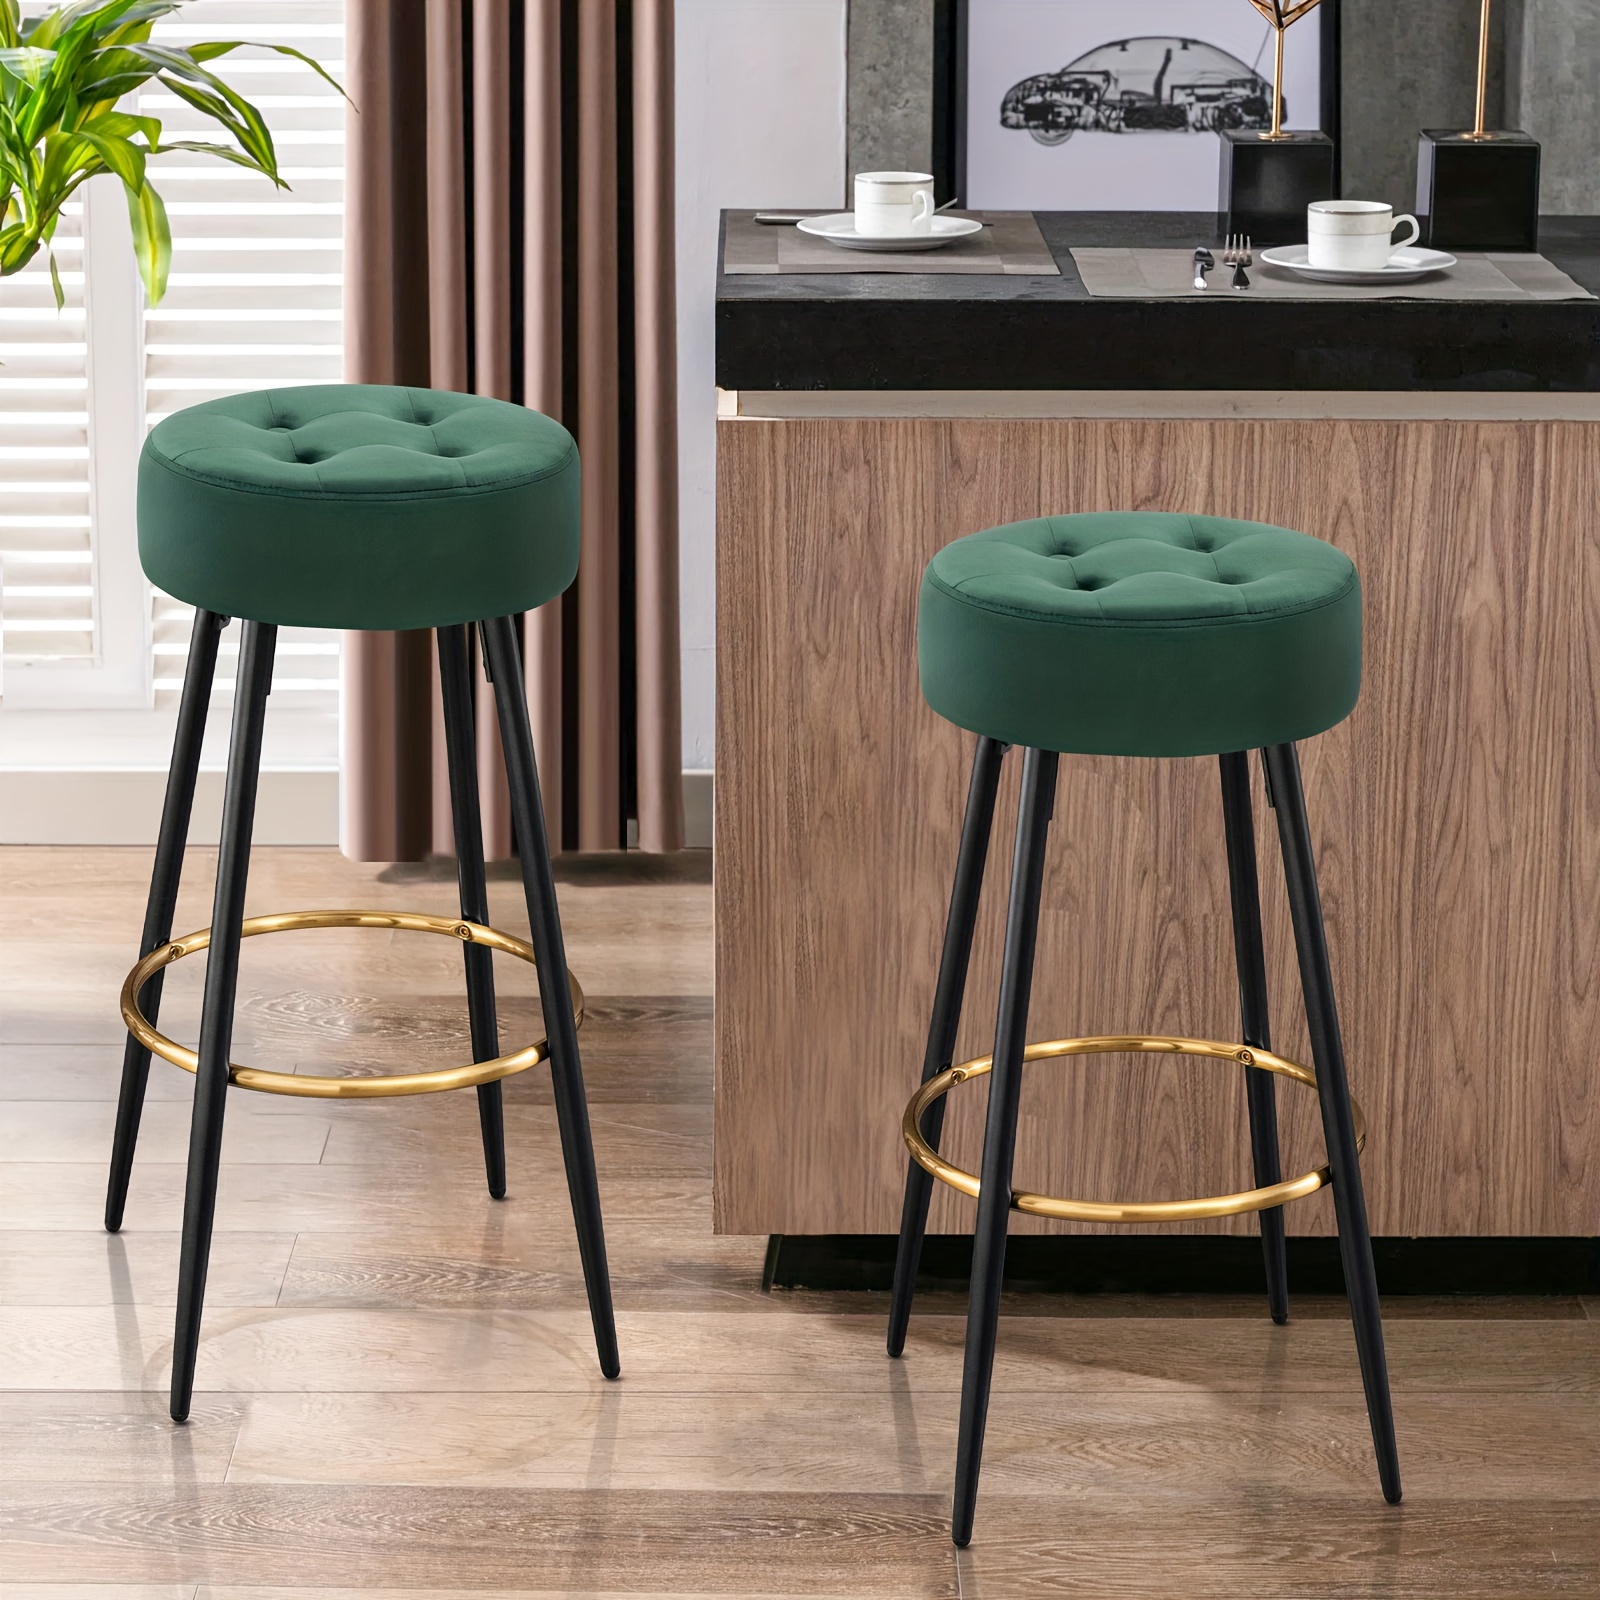 

Set Of 2 For Kitchen Bar Restaurant 30 Inch Height Round Bar Stools, Upholstered Dining Chair Stools With Gold Footrest